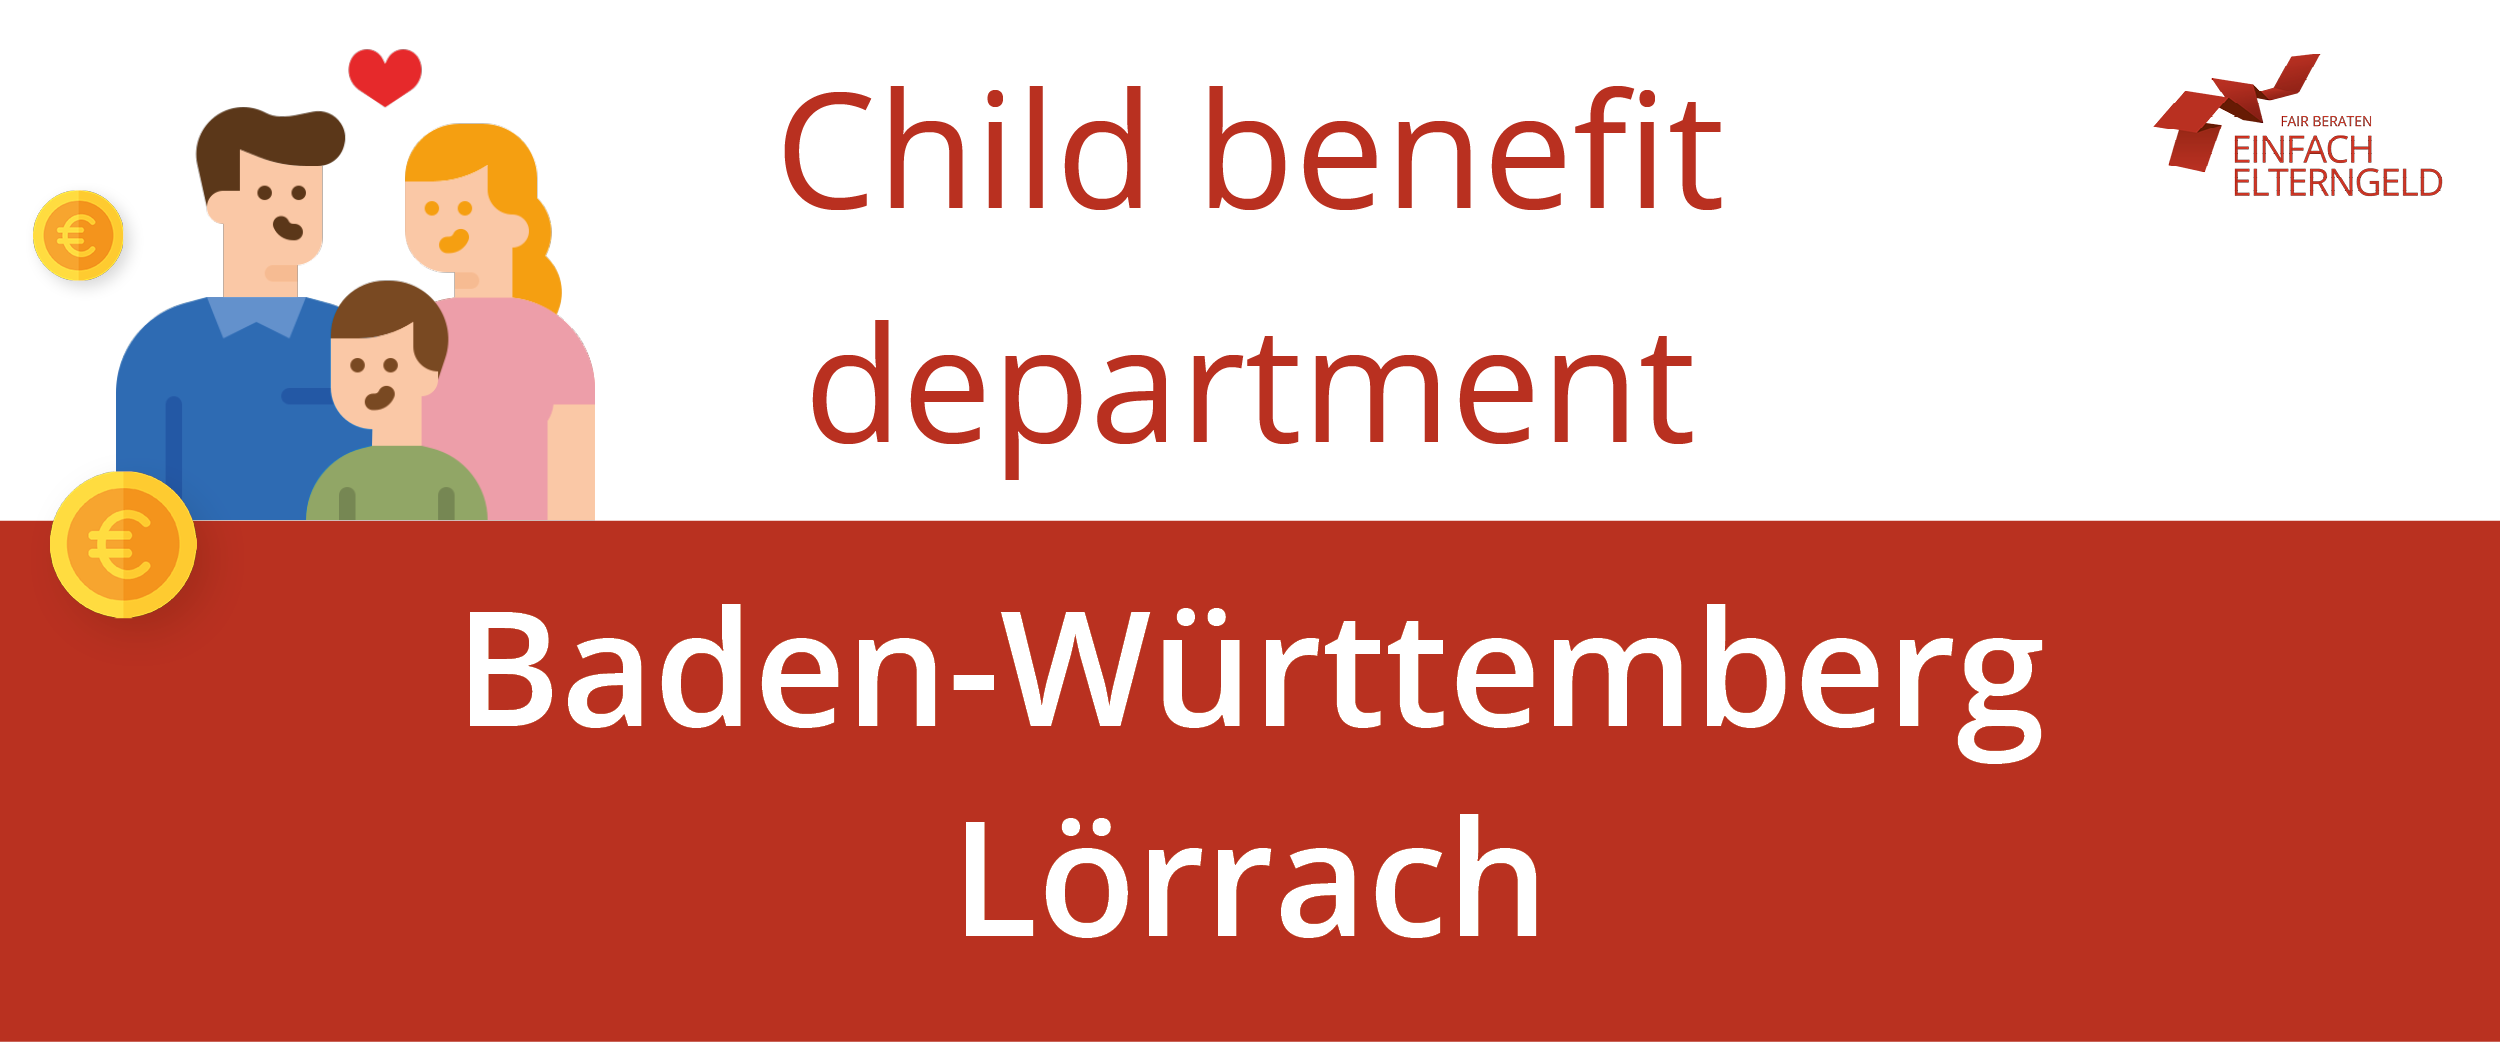 We introduce to you the Child benefit department Baden-Württemberg Lörrach.